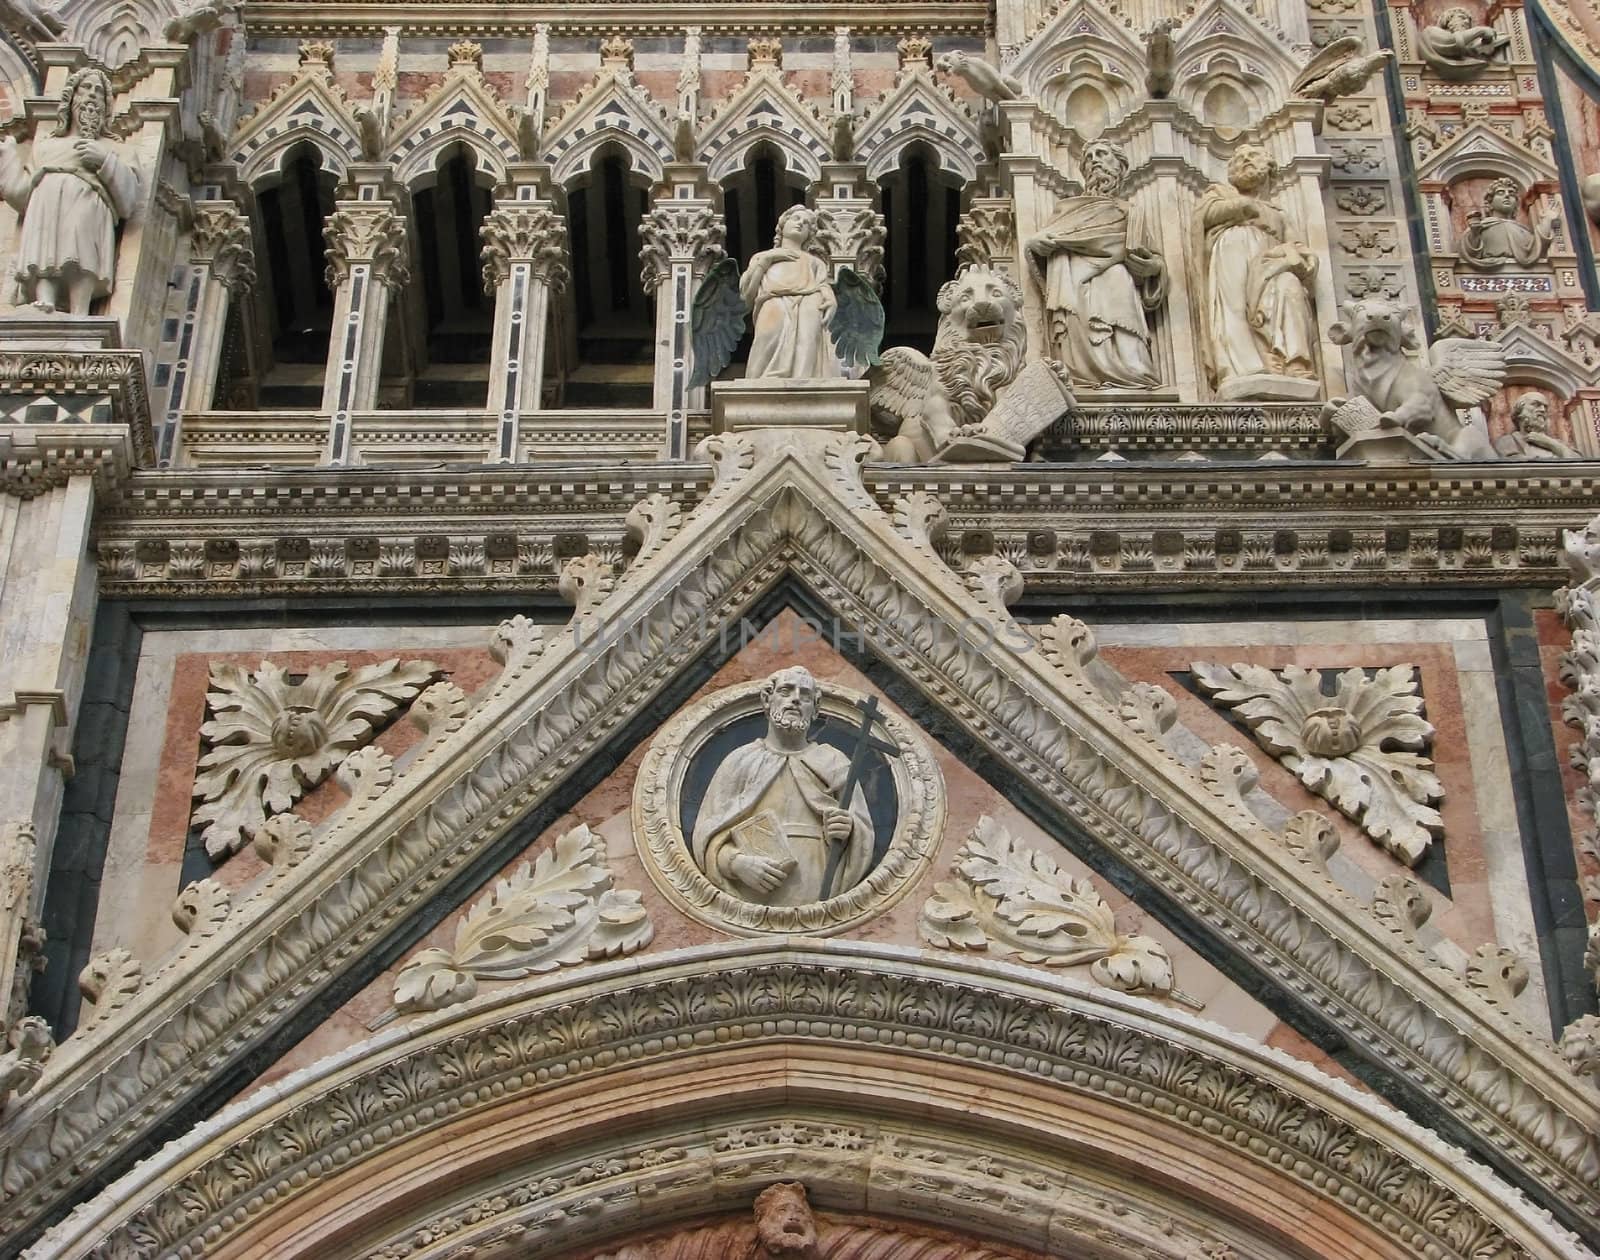 Carvings and statues on the exterior of the Duomo in Siena, Italy.
